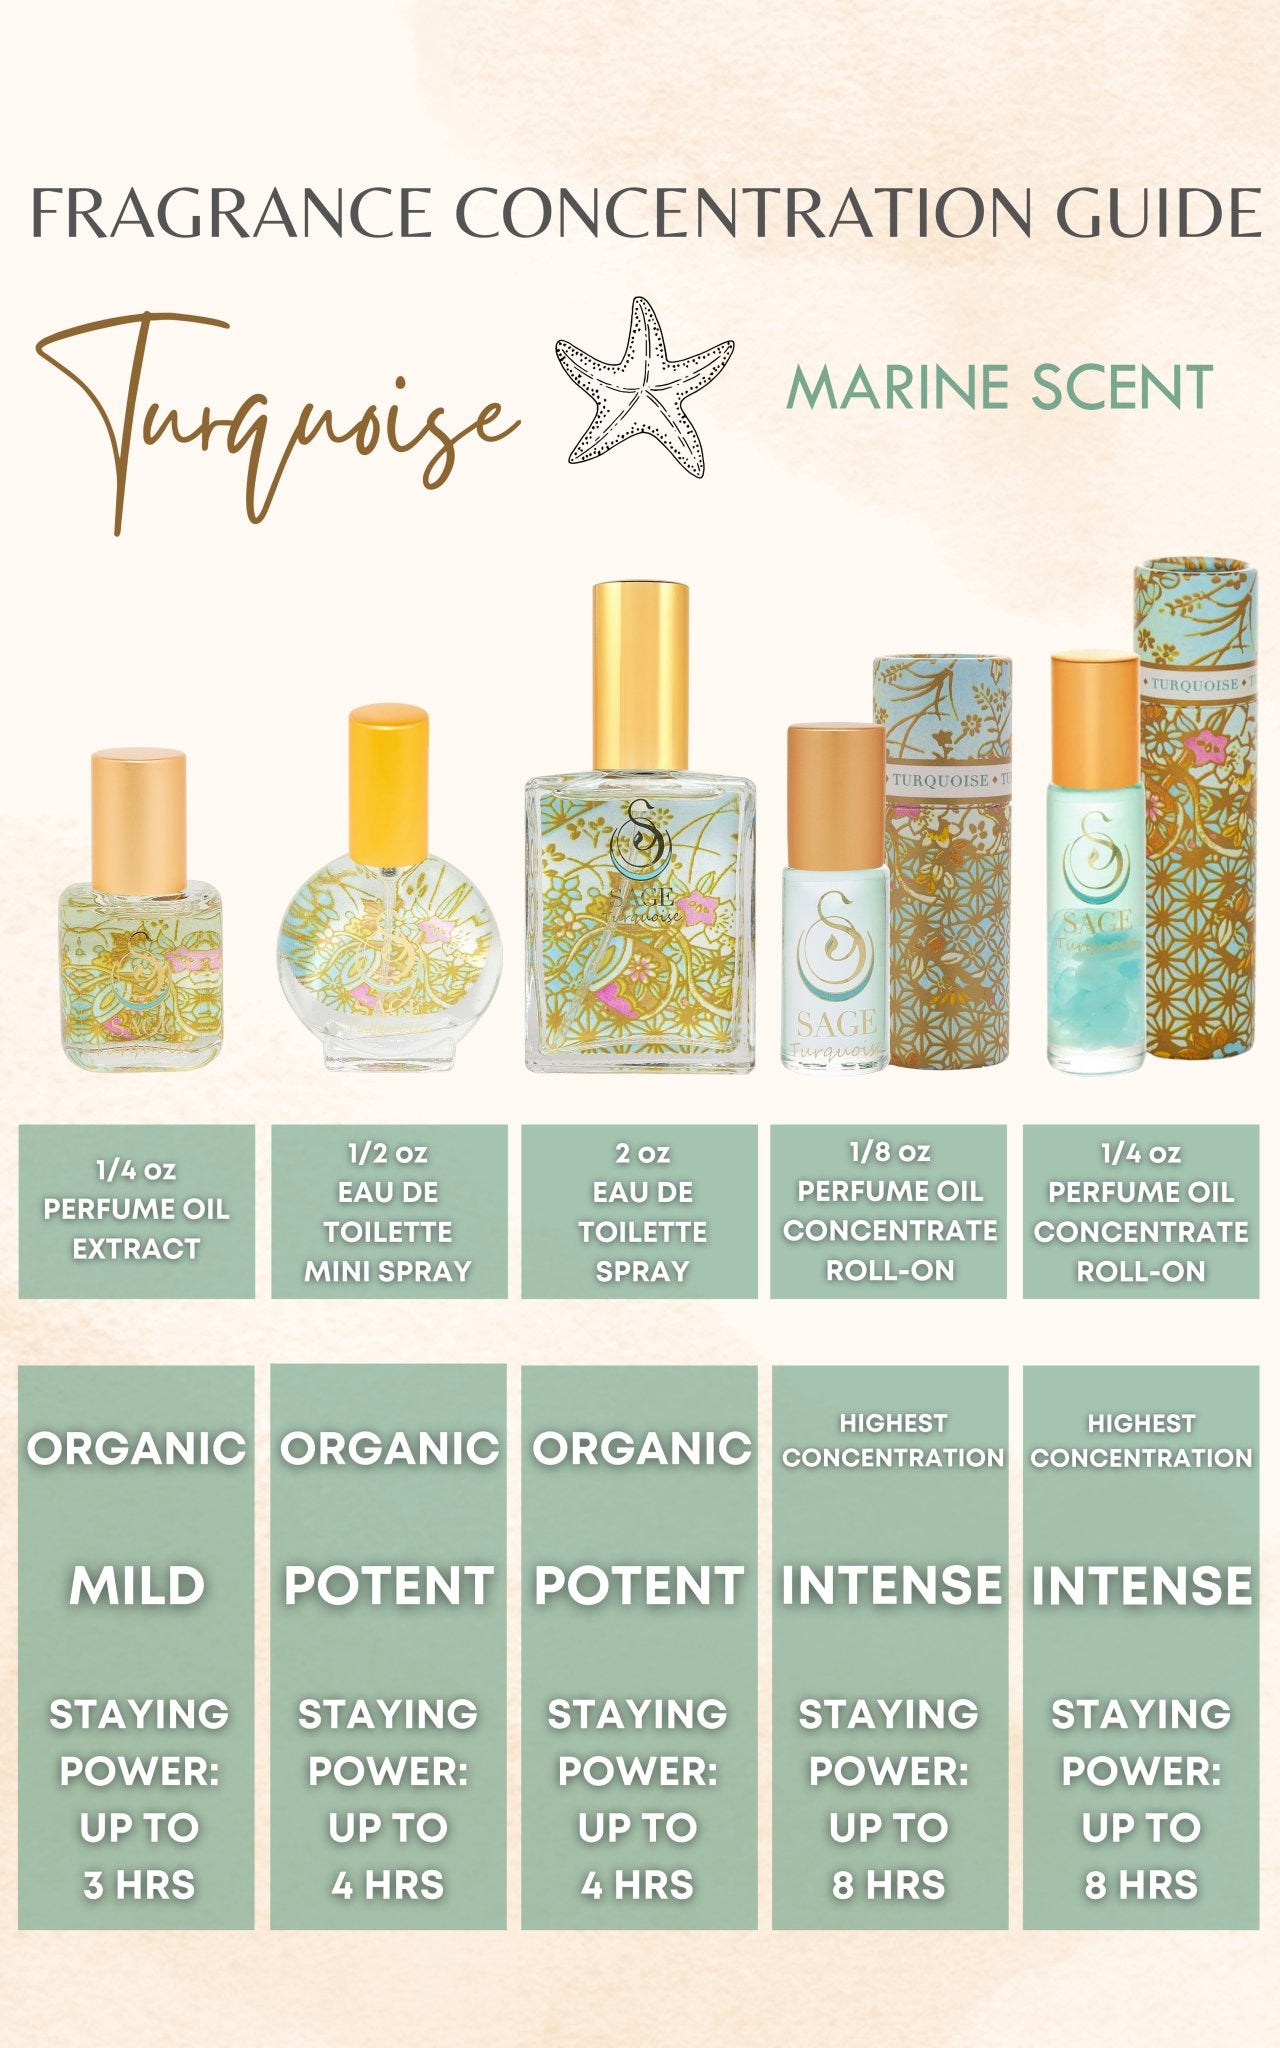 INDULGE ~ TURQUOISE Perfume Oil Concentrate Roll-On and Organic Eau de Toilette Gift Set by Sage - The Sage Lifestyle